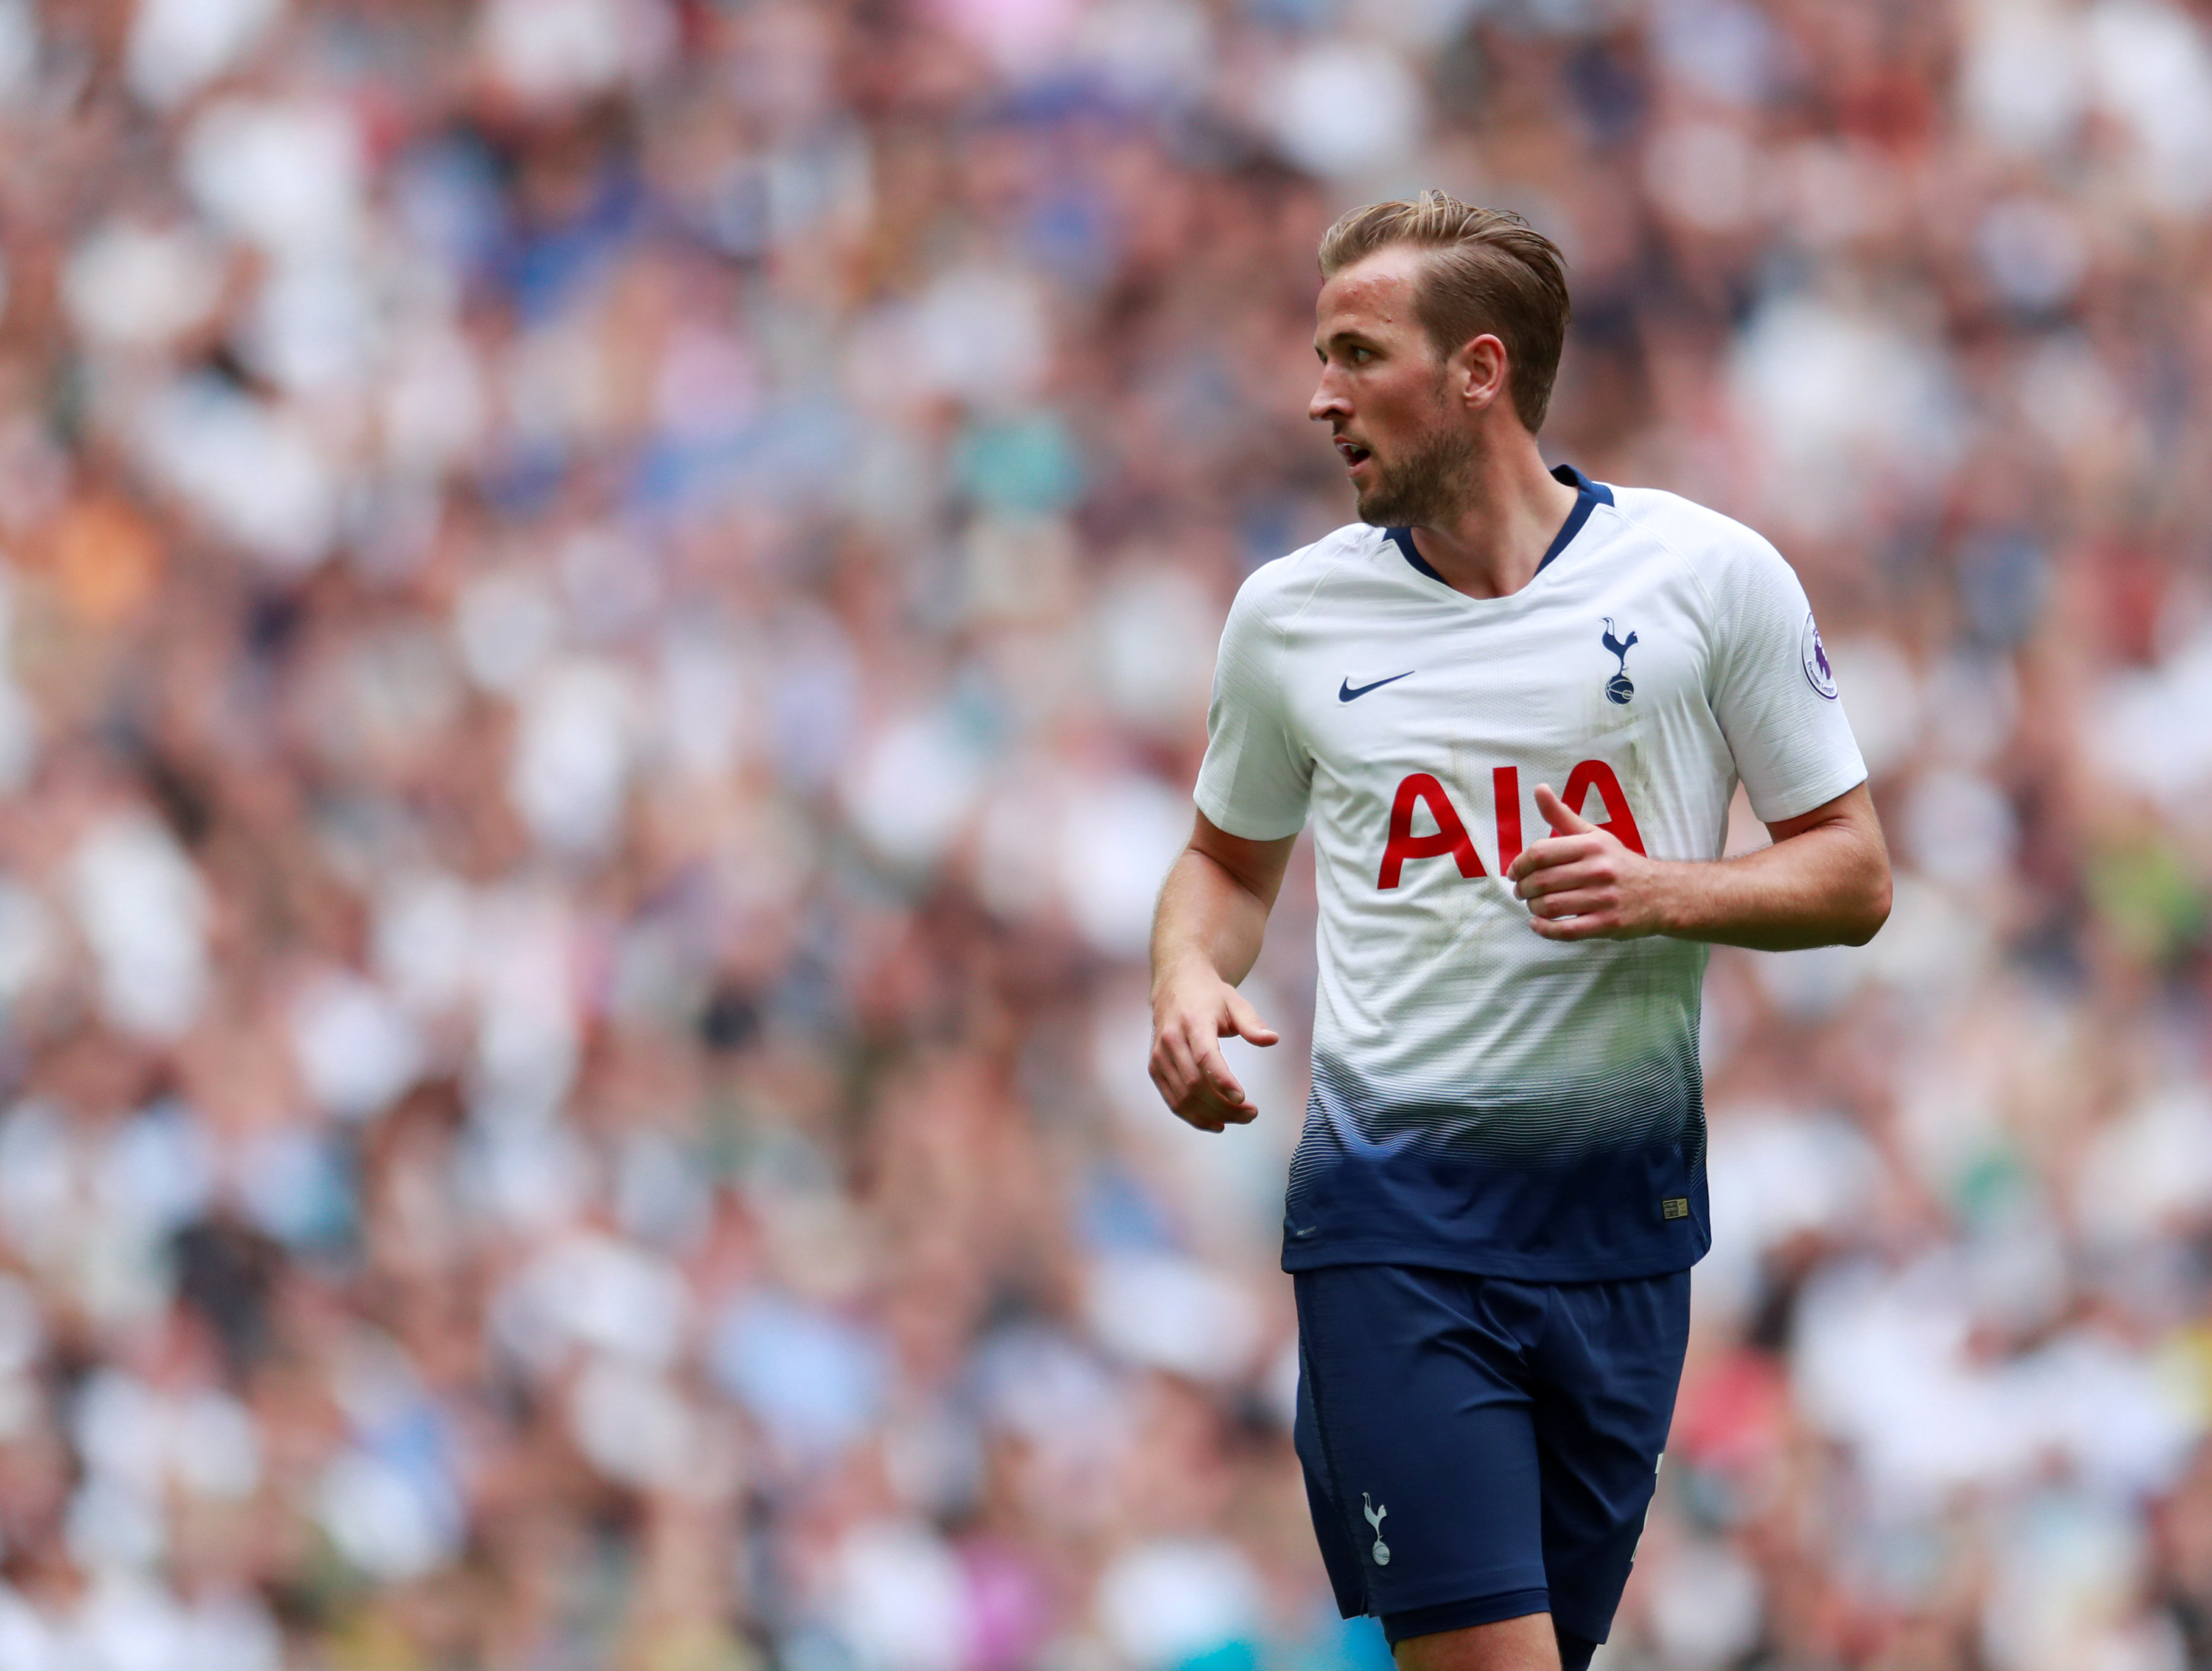 Football: Kane ends August drought as Spurs secure second win